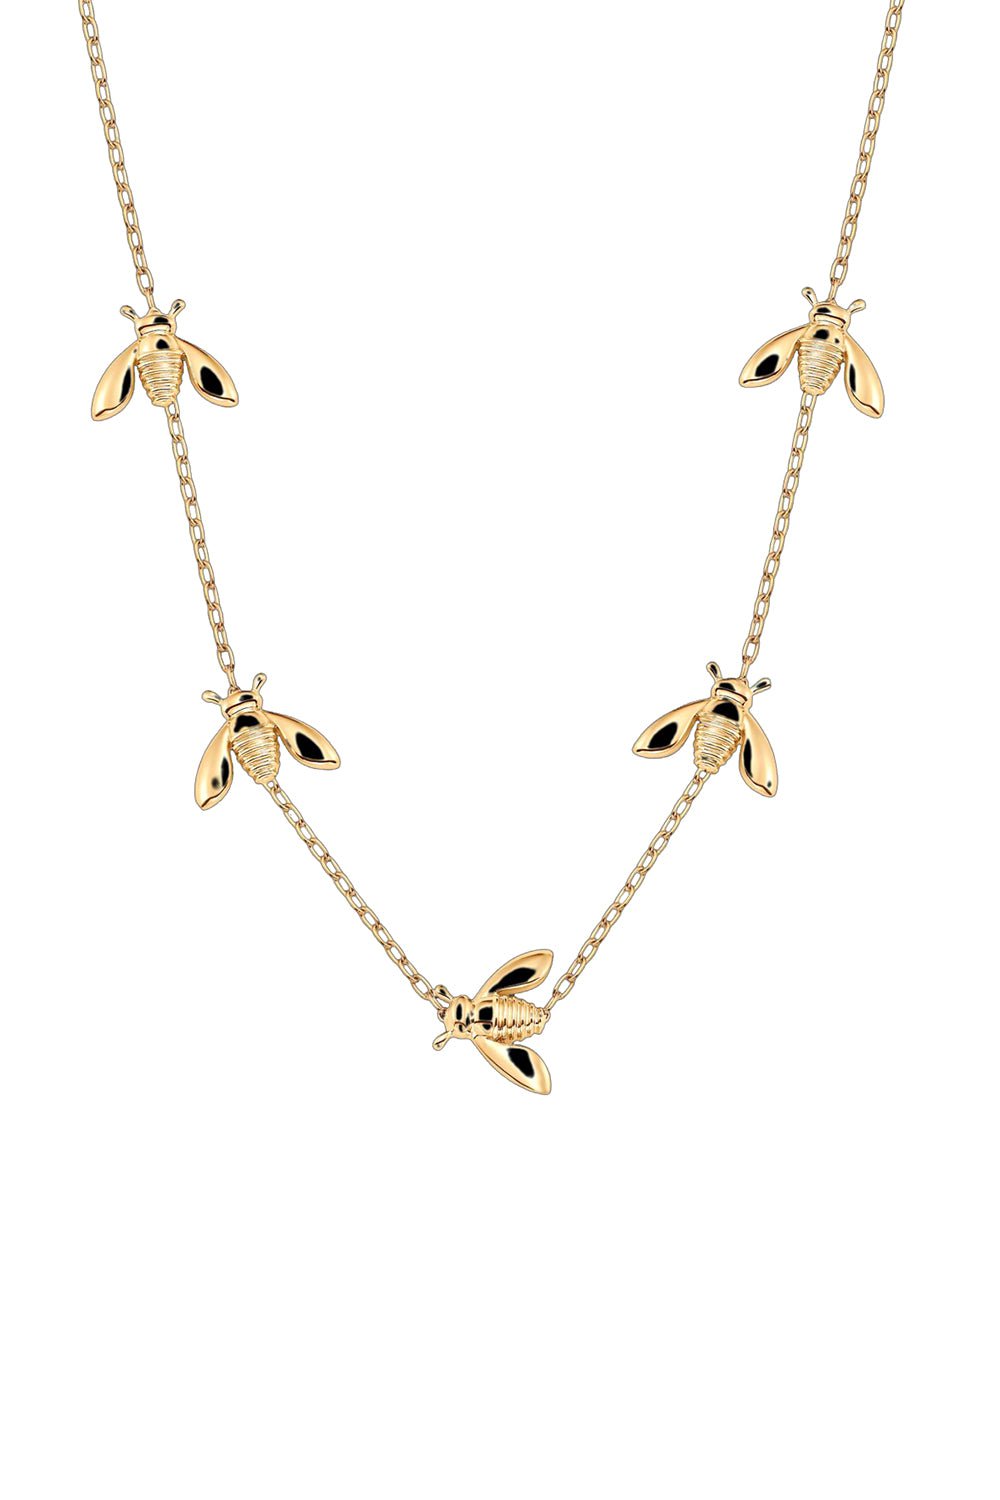 SARA WEINSTOCK-Queen Bee 5 Station Necklace-YELLOW GOLD